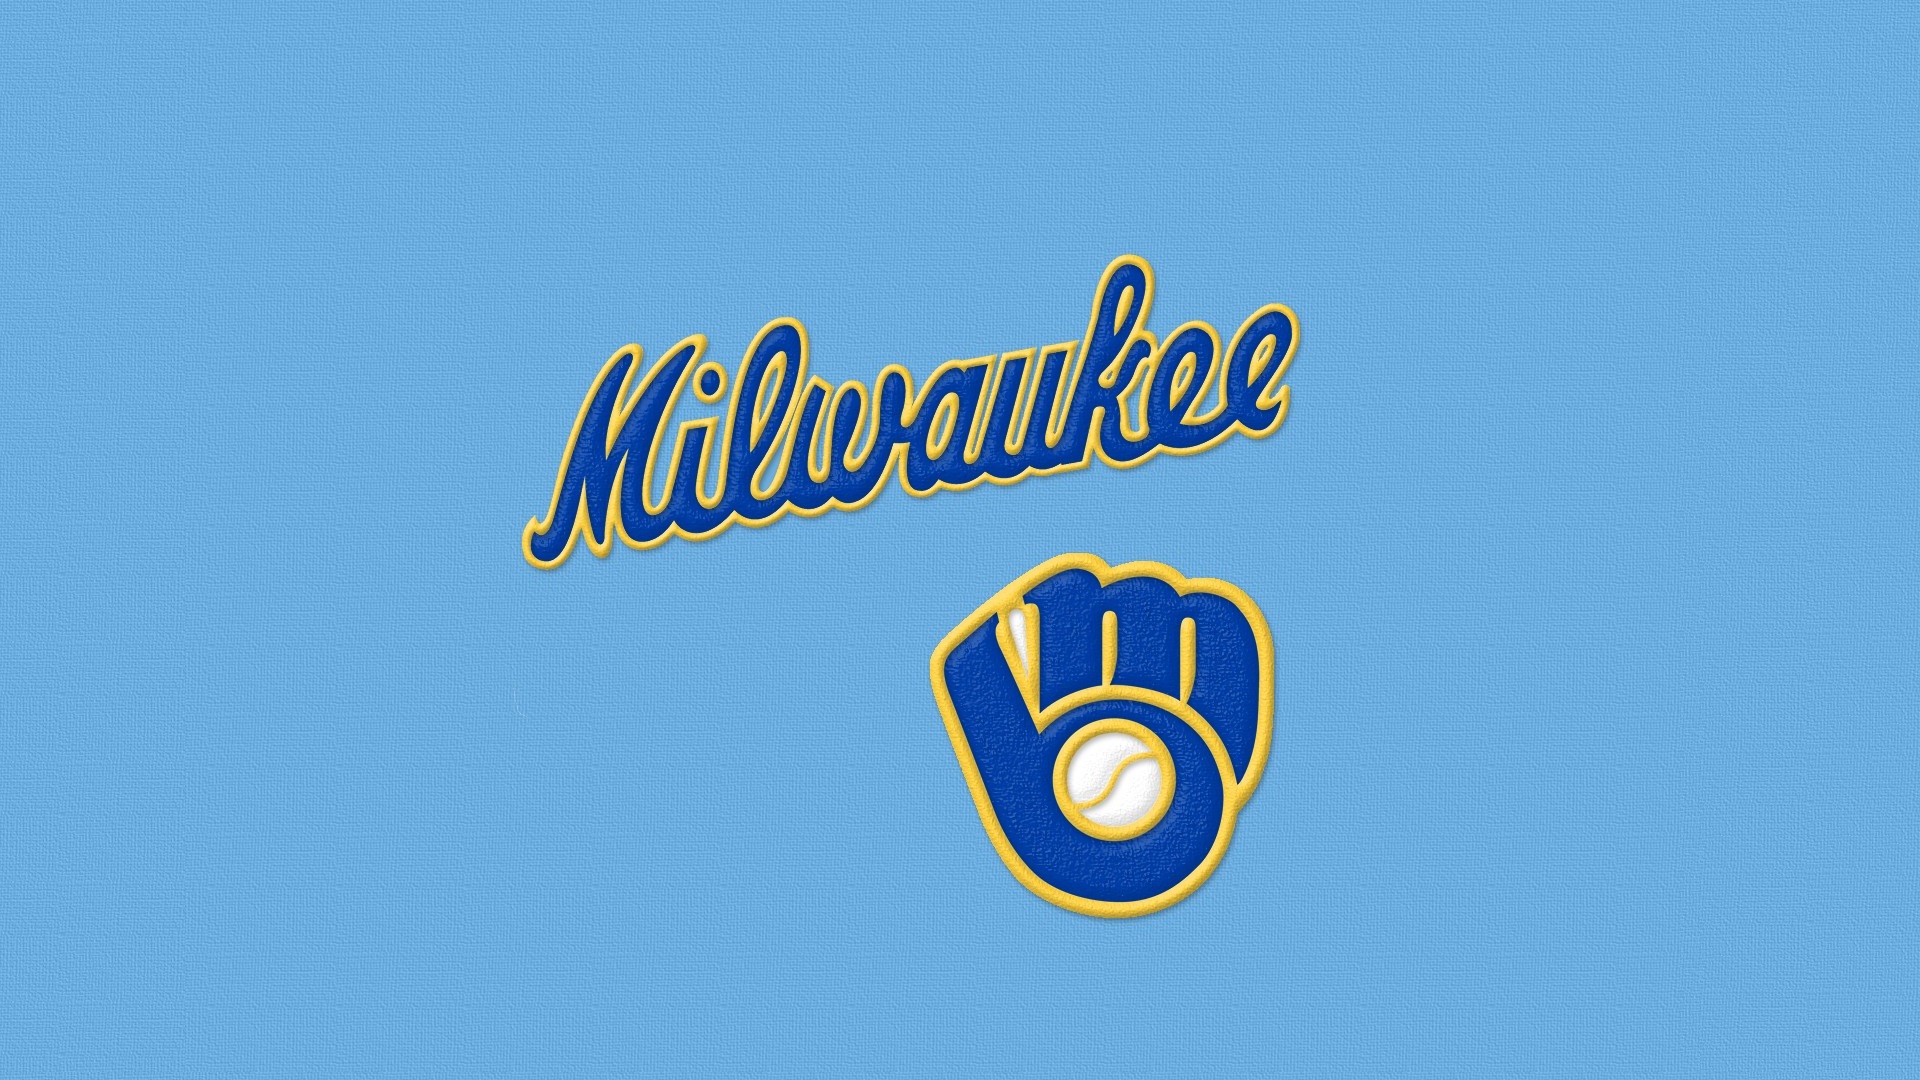 Milwaukee Brewers MLB Wallpaper For Mac With high-resolution 1920X1080 pixel. You can use this wallpaper for Mac Desktop Wallpaper, Laptop Screensavers, Android Wallpapers, Tablet or iPhone Home Screen and another mobile phone device